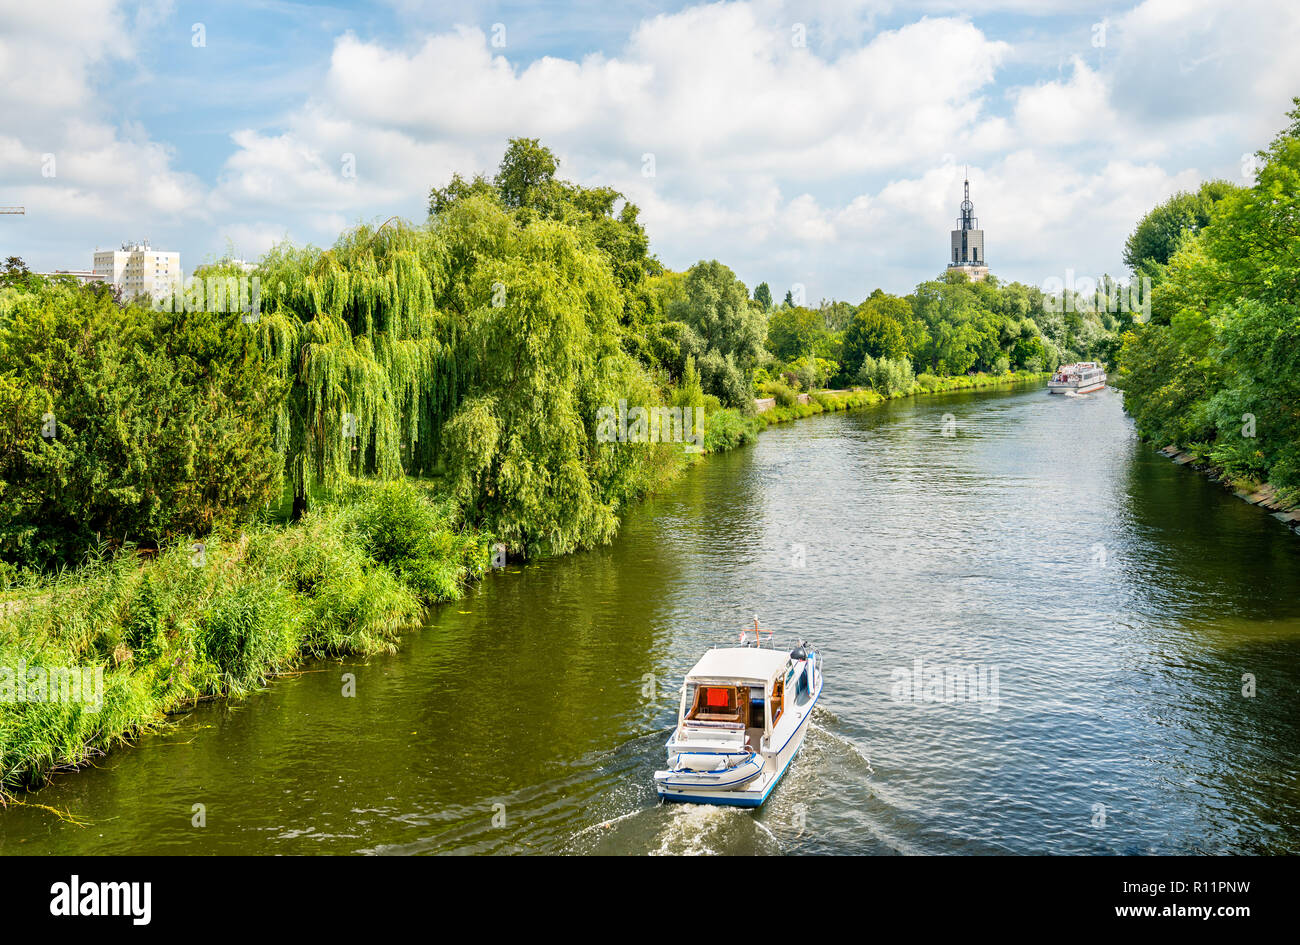 View of the Havel river in Potsdam, Germany Stock Photo